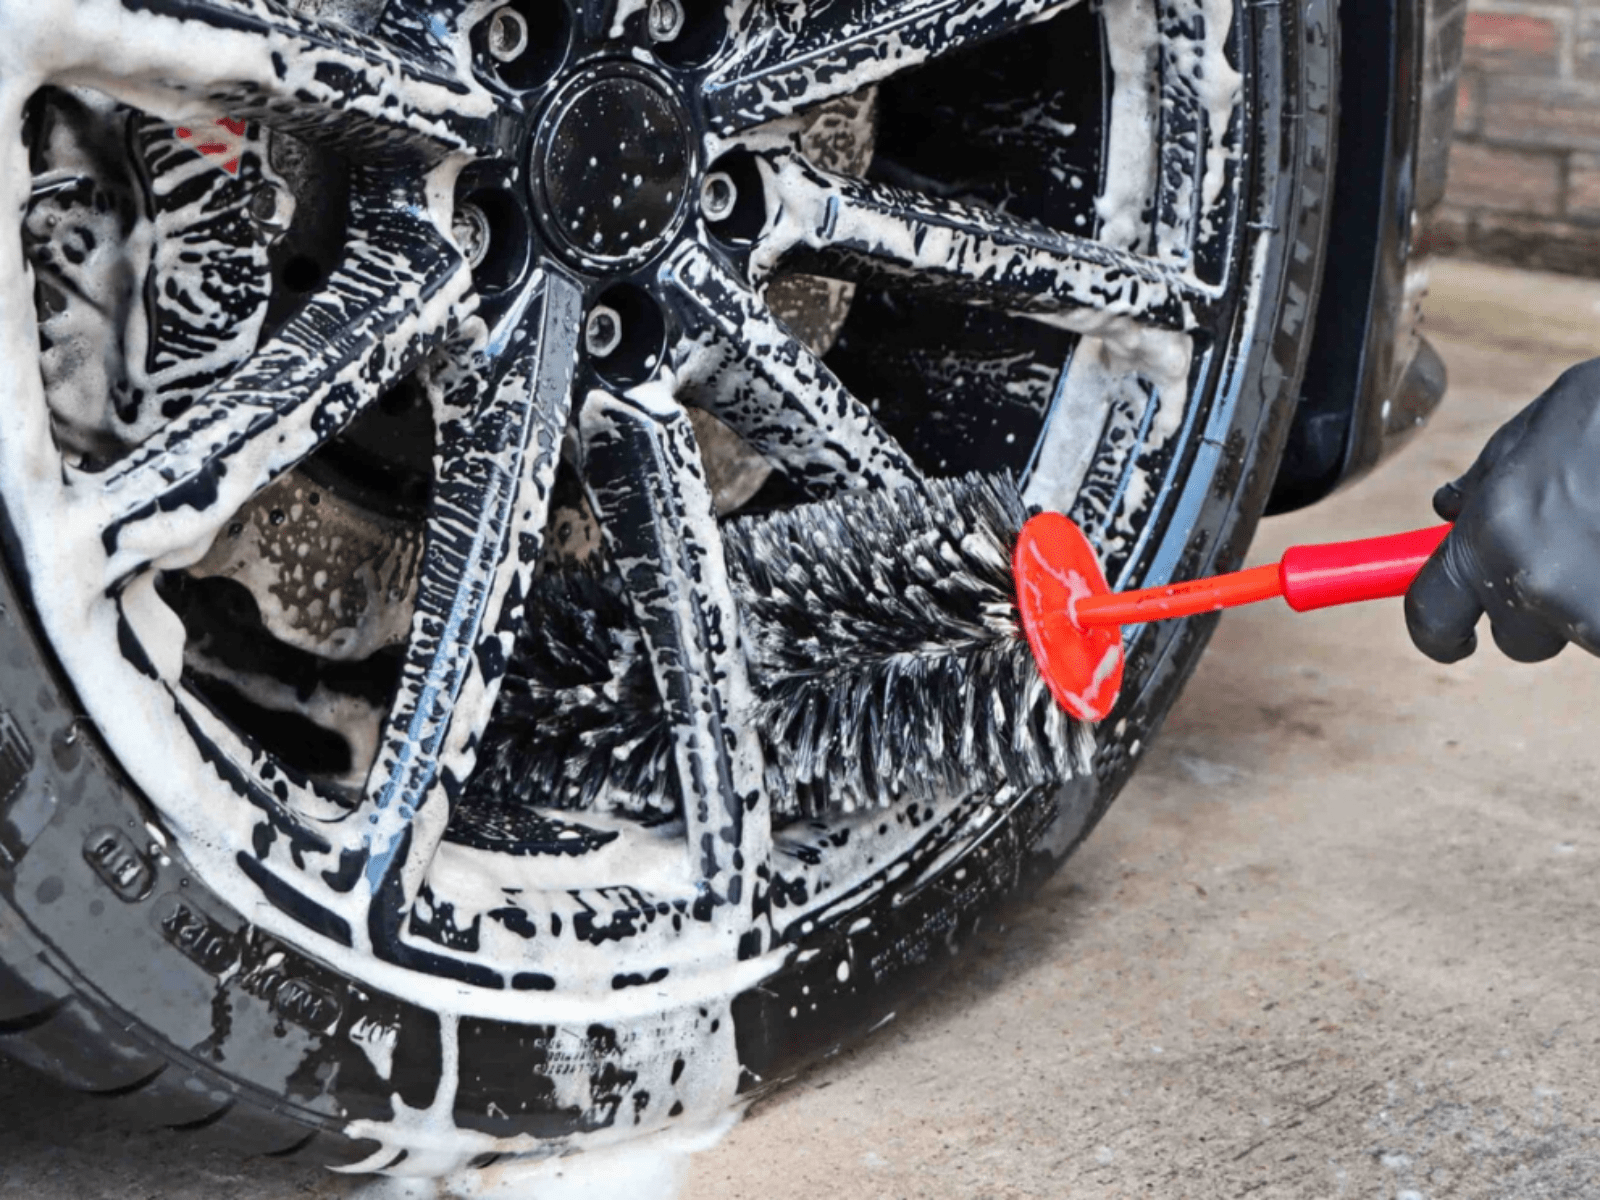 Removing brake dust from your car's wheels